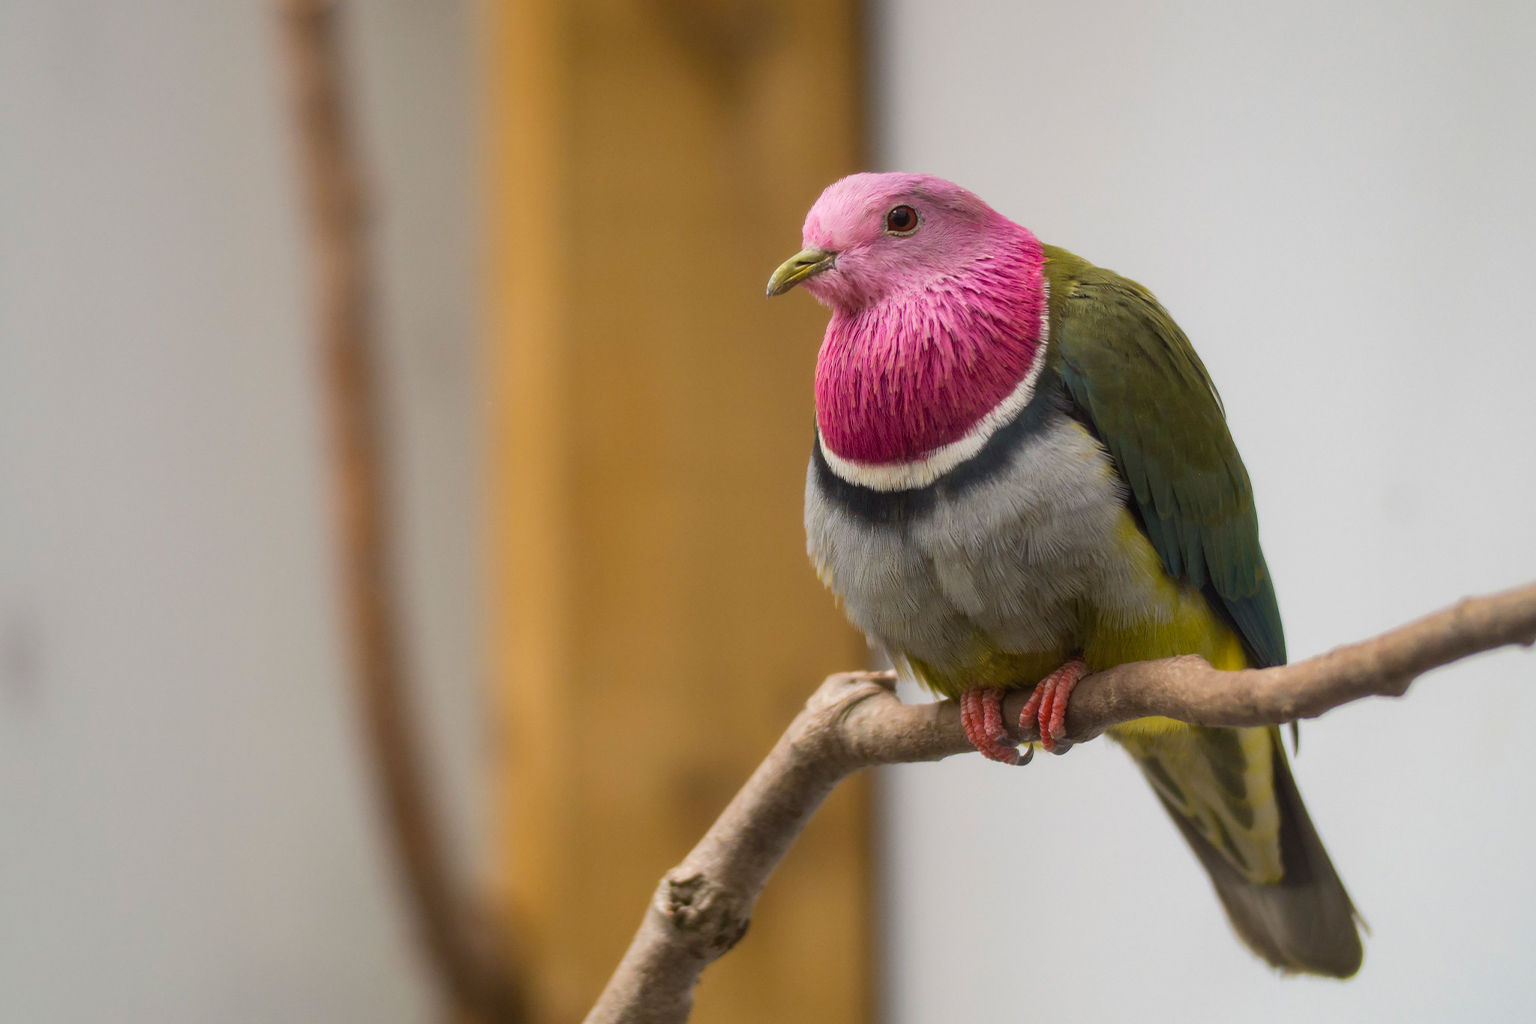 The pink-headed fruit dove